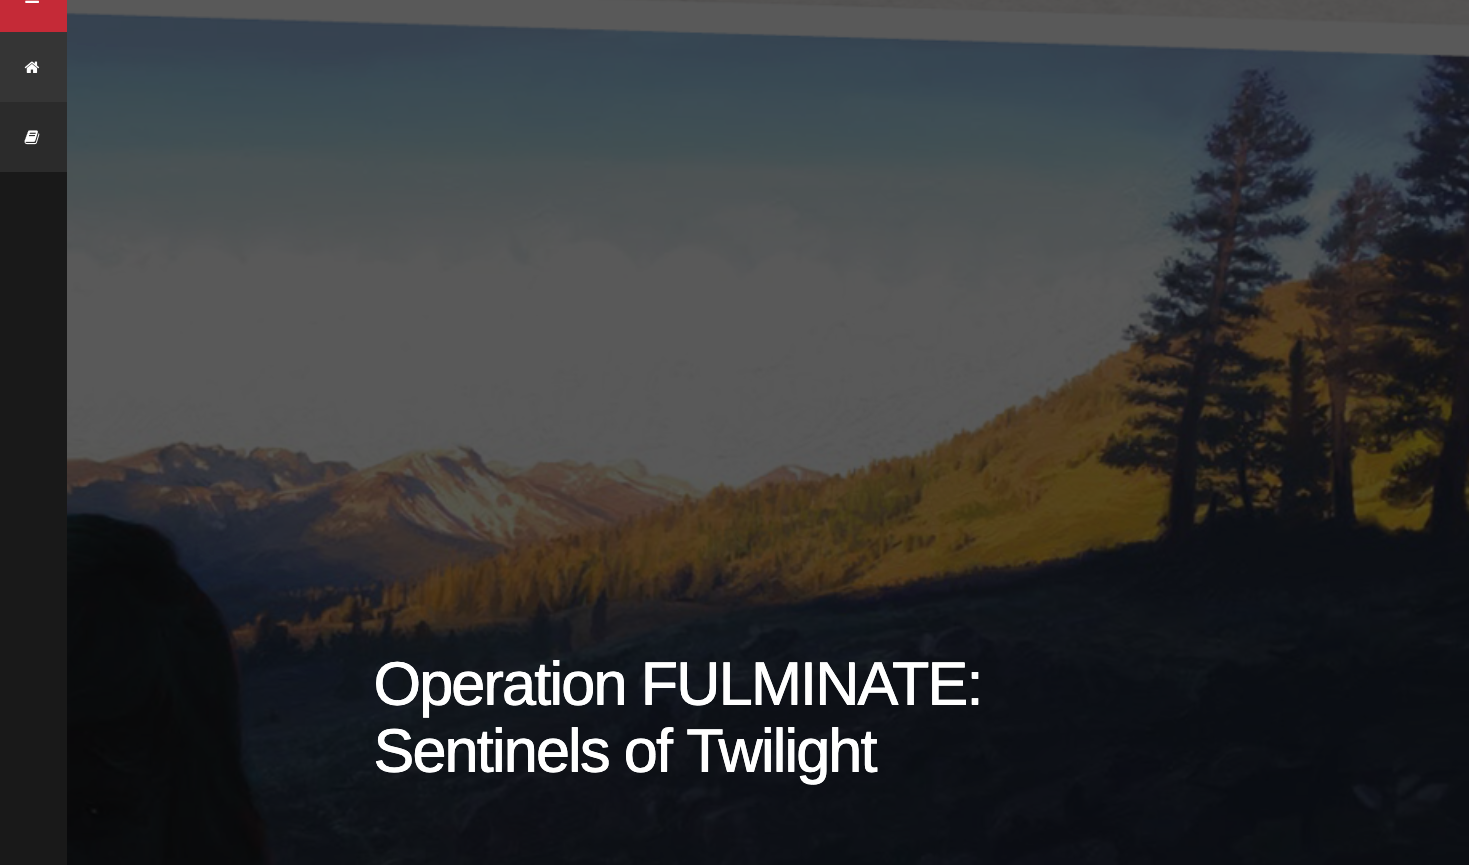 "Sentinels of Twilight" resources at The Membrane's Journal